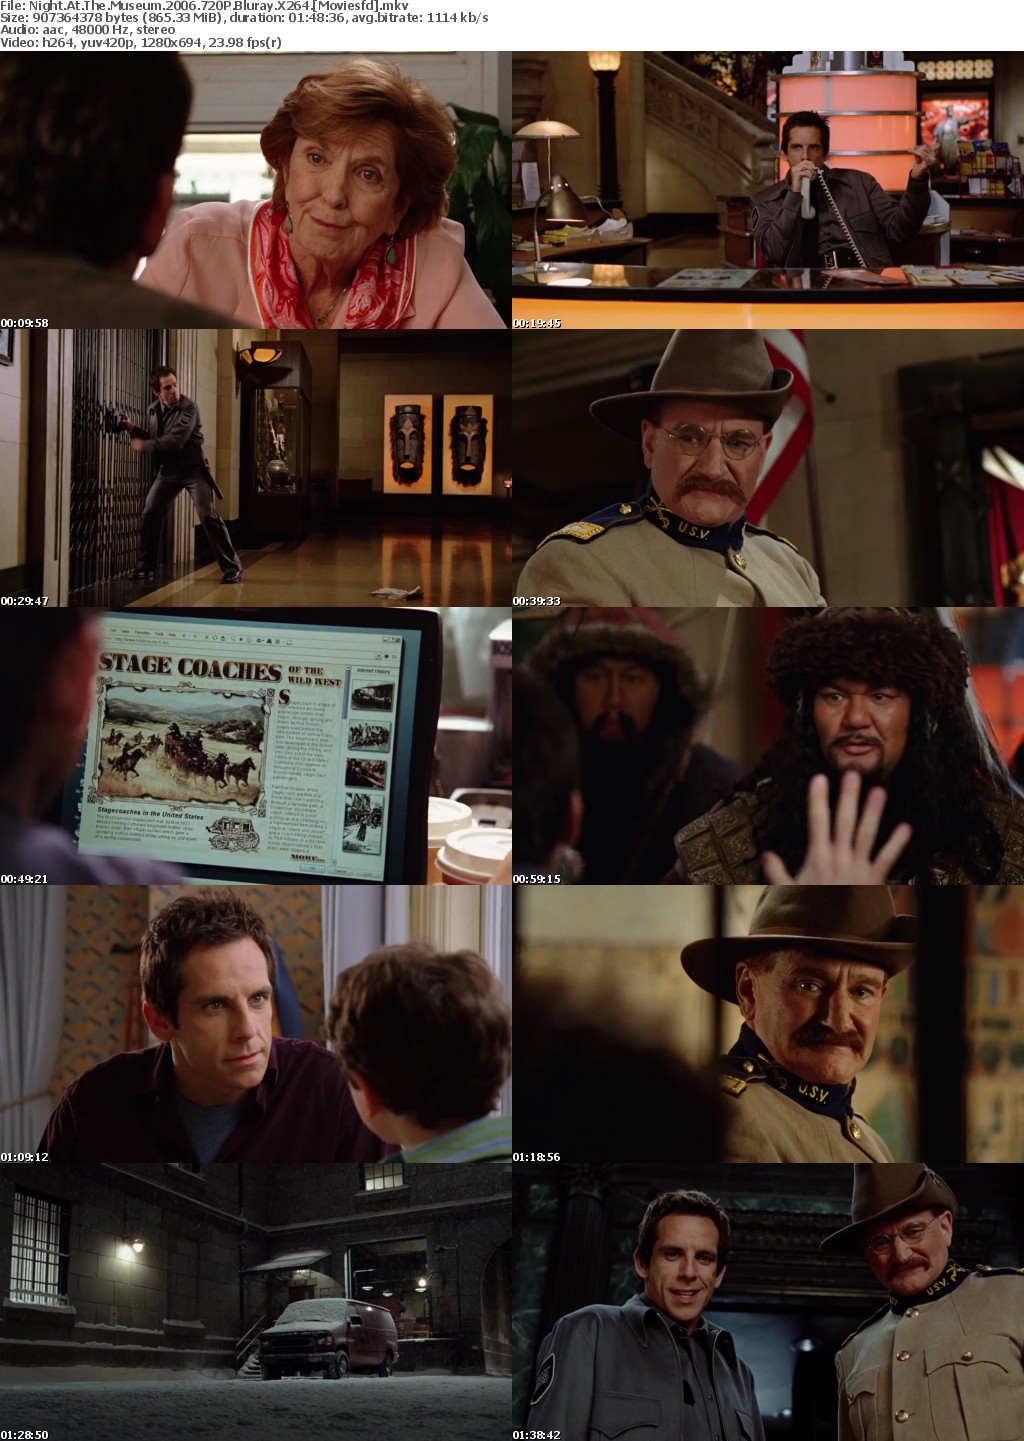 Night at the Museum (2006) 720p BluRay X264 MoviesFD